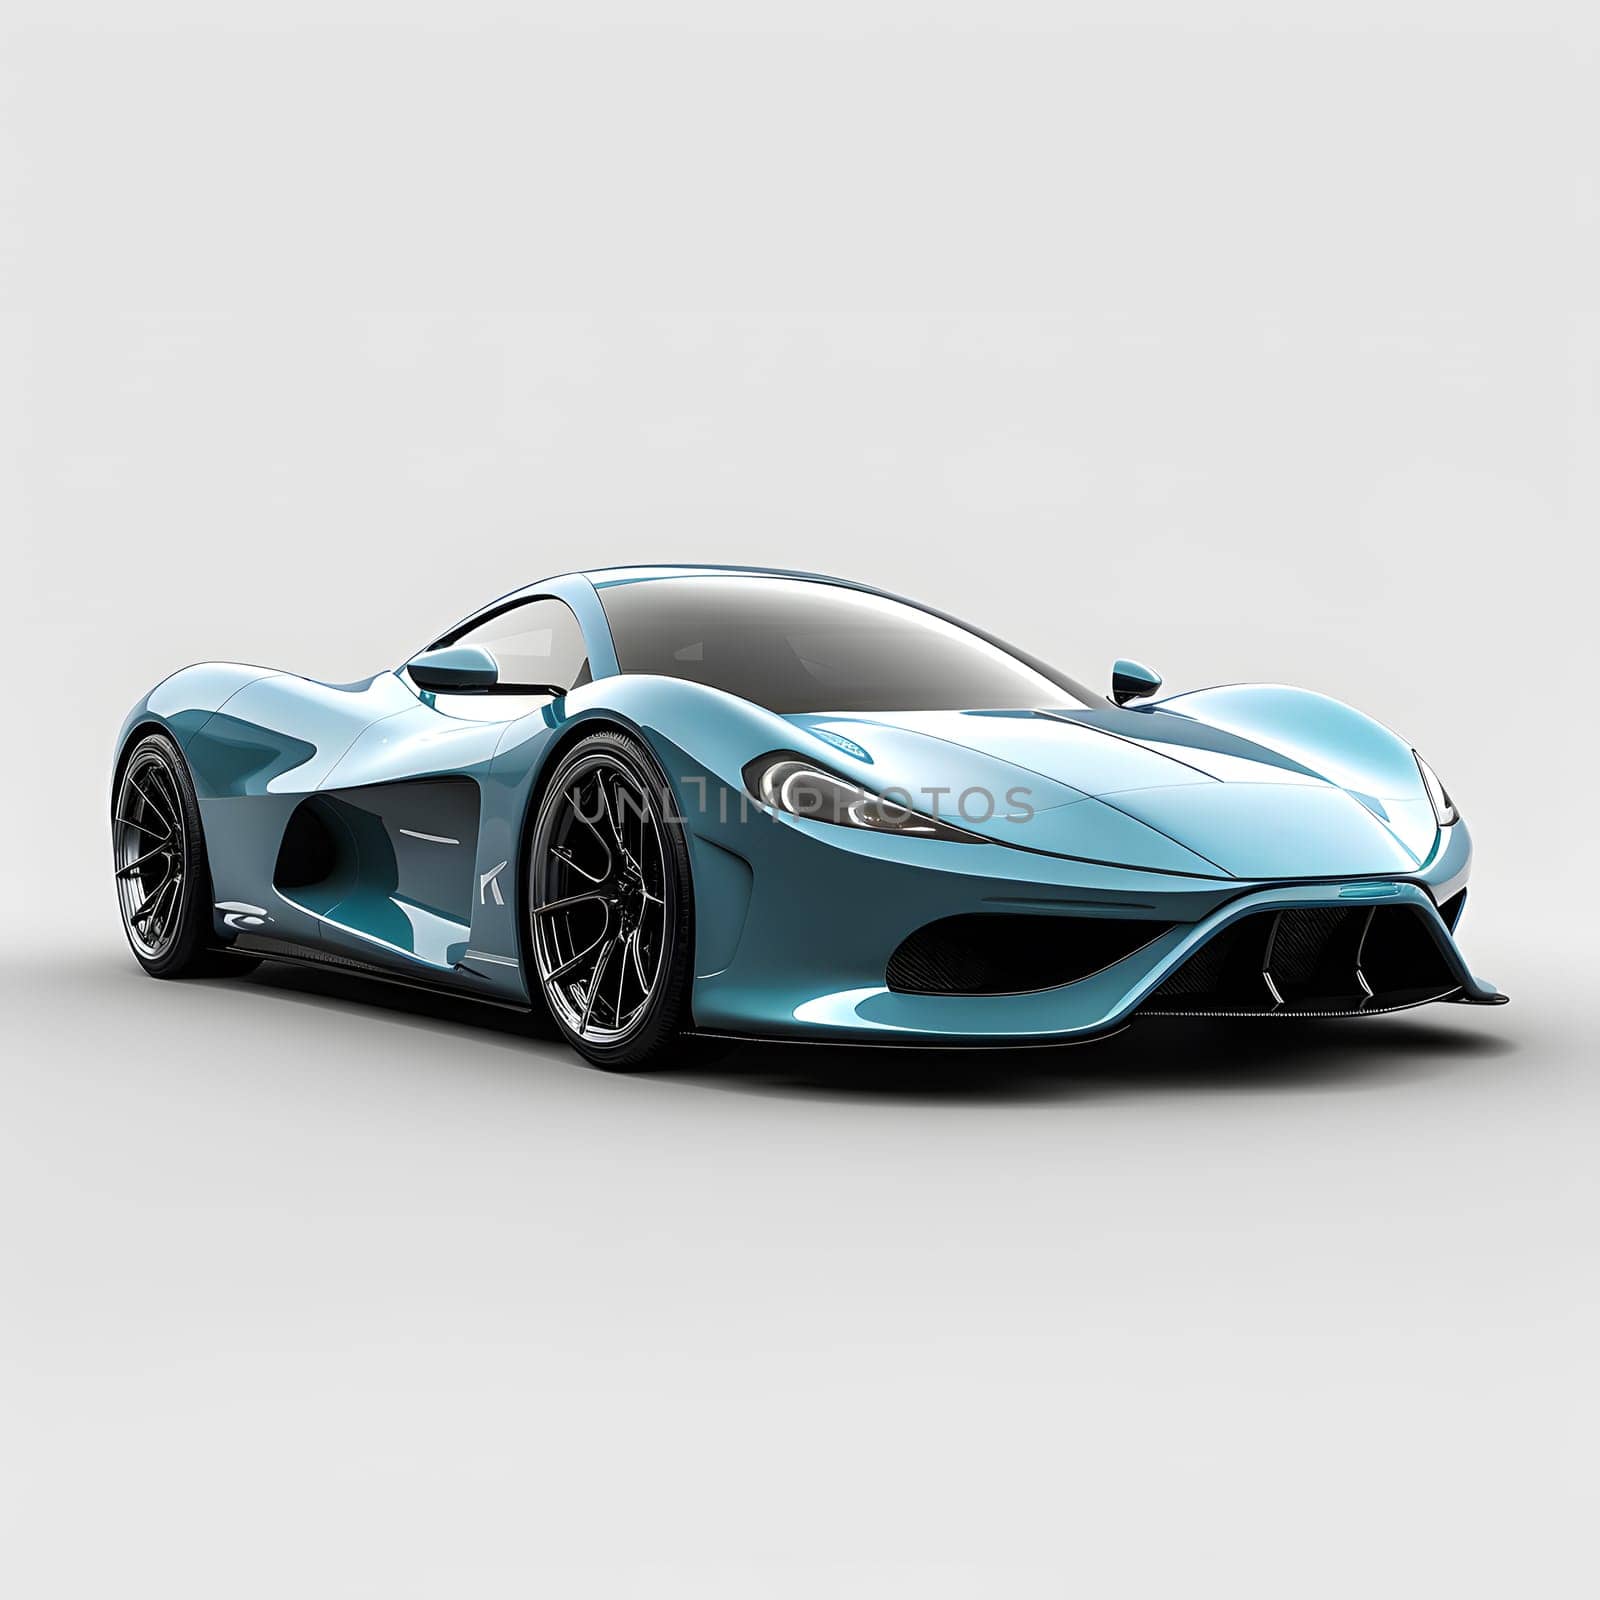 A sleek blue sports car with shiny wheels and tires parked on a clean white background, showcasing its striking automotive design and exterior features like the hood and bumper